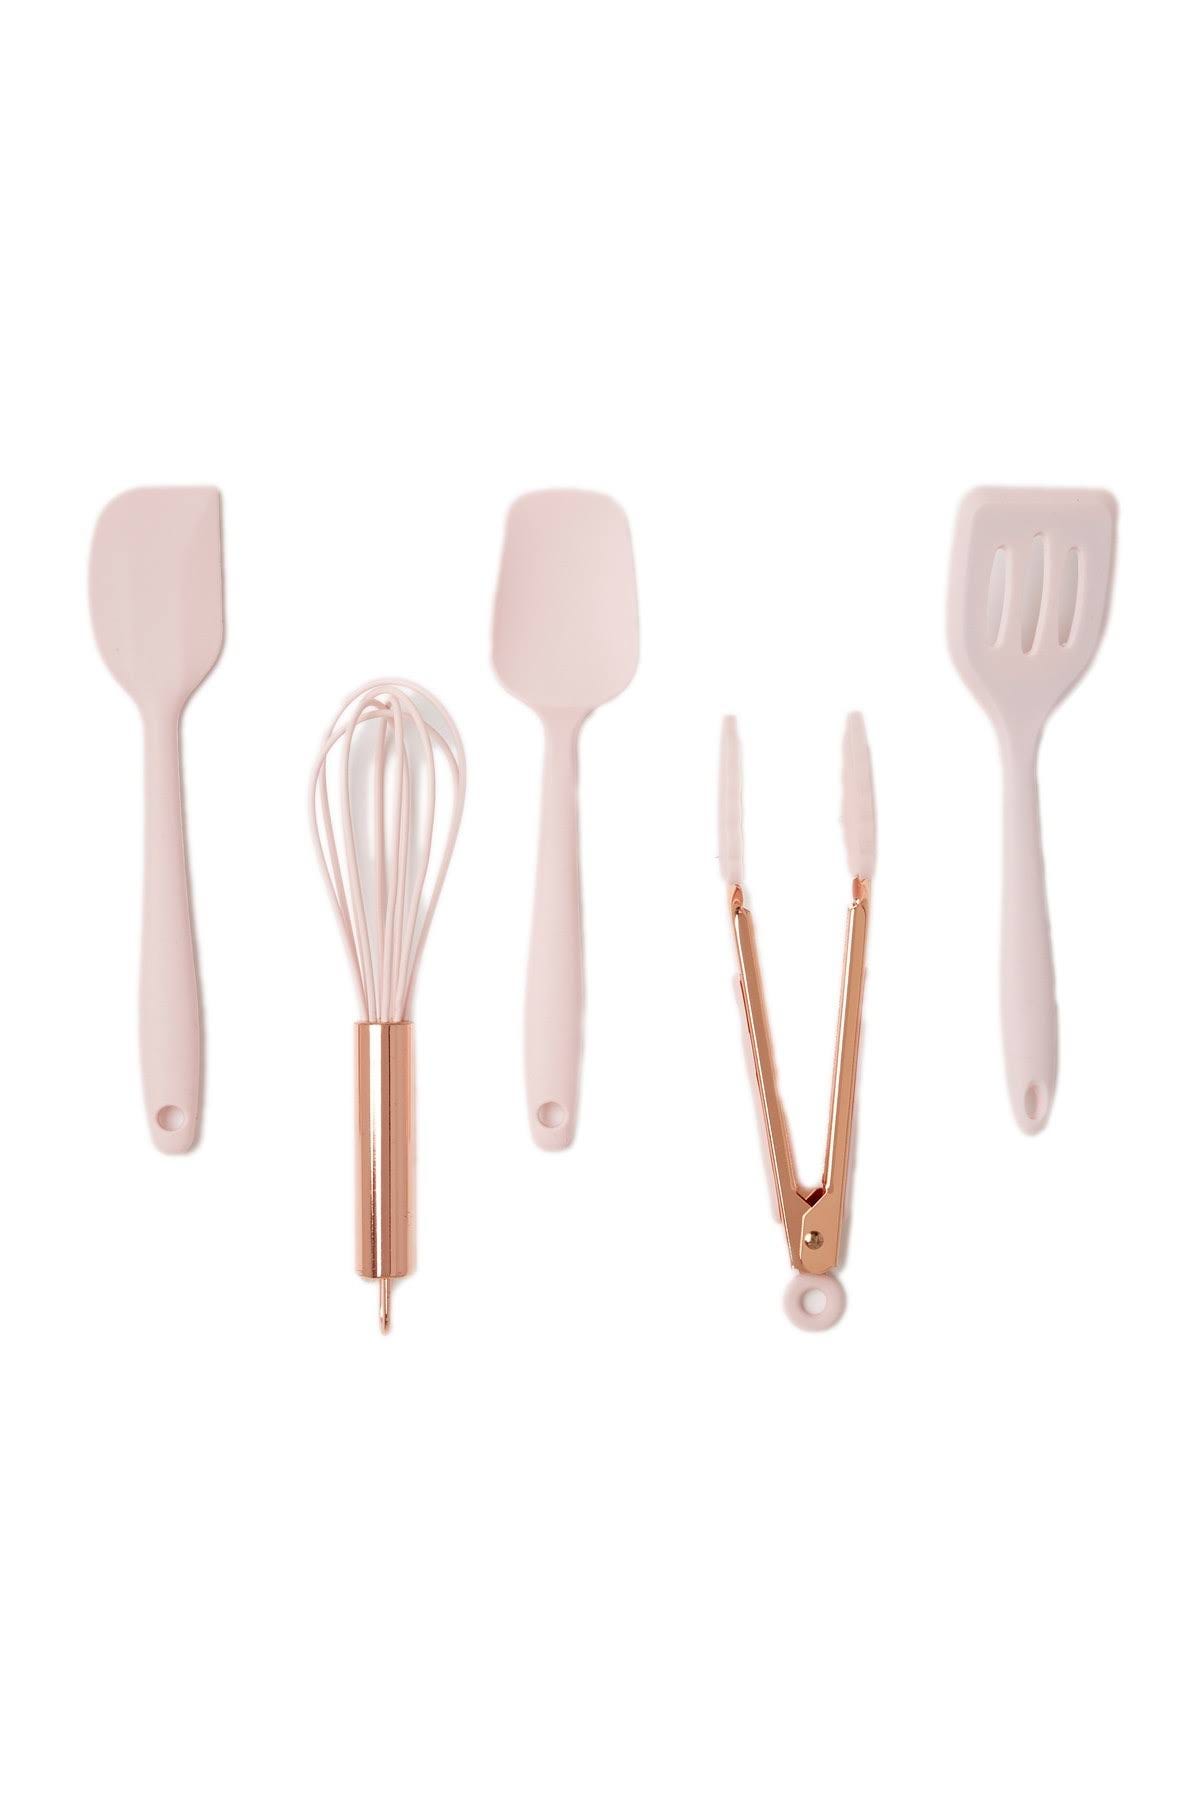 Pink and Rose Gold Silicone Mini Kitchen Utensils Set | Image